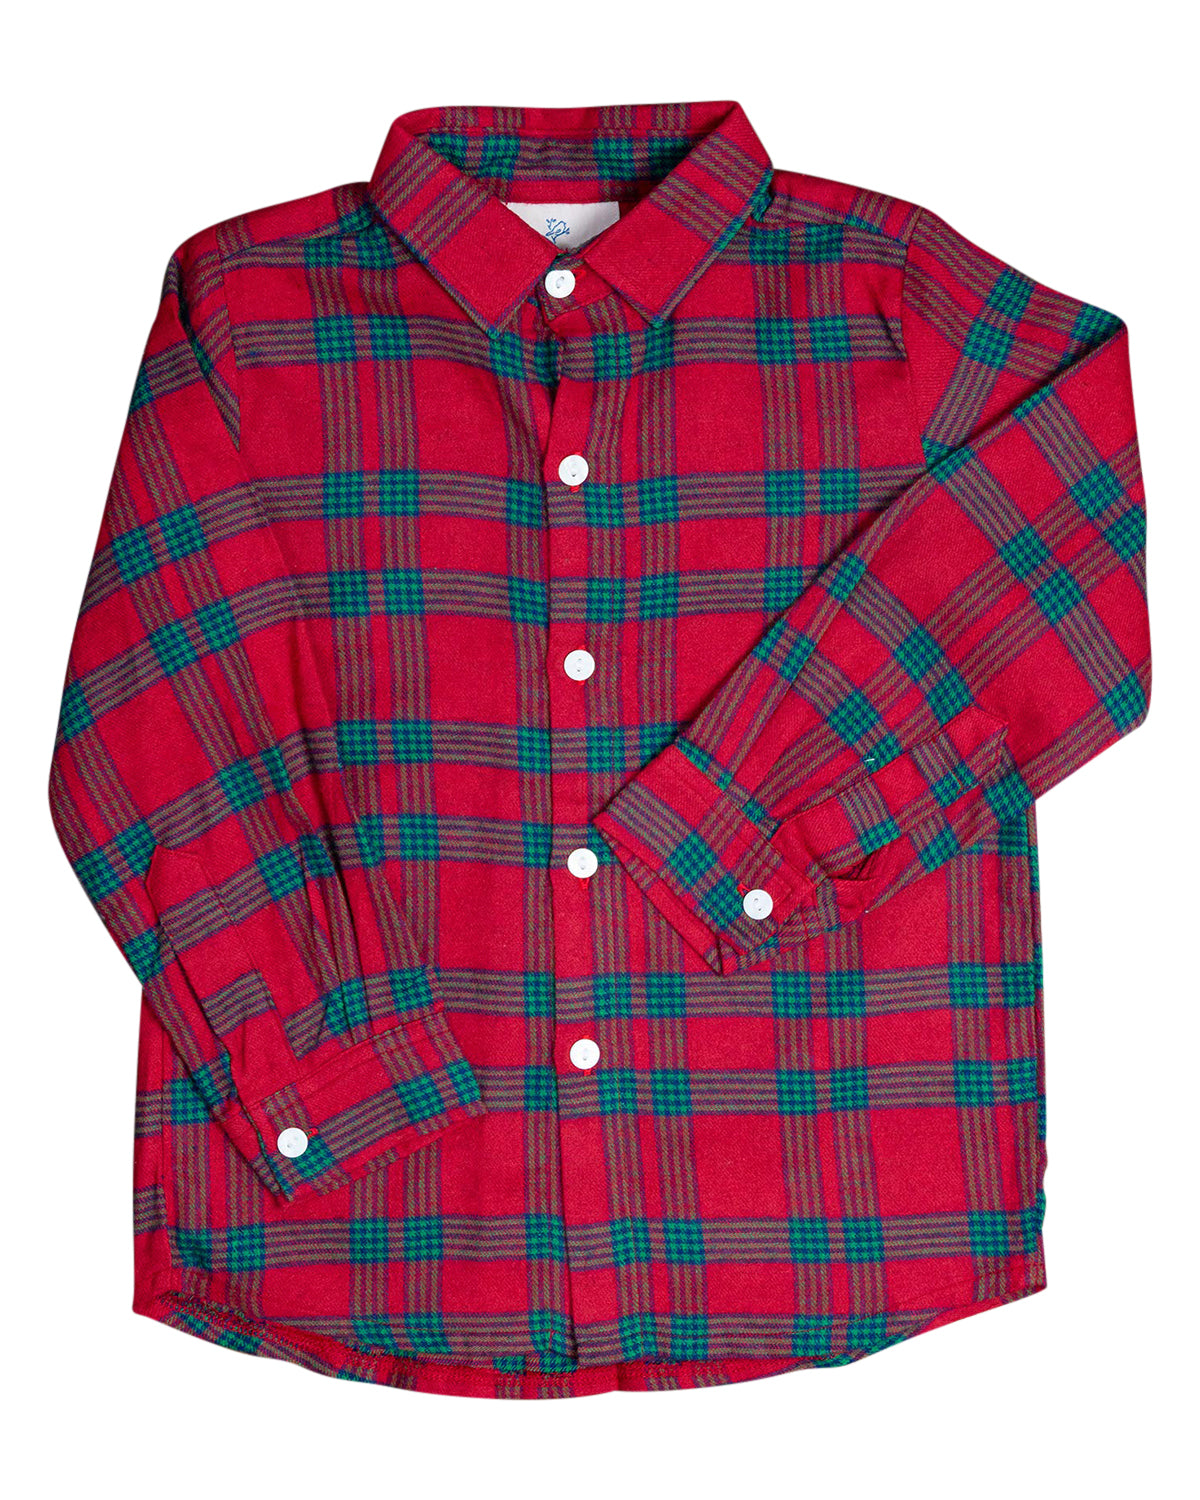 Red and Green Plaid Collared Shirt